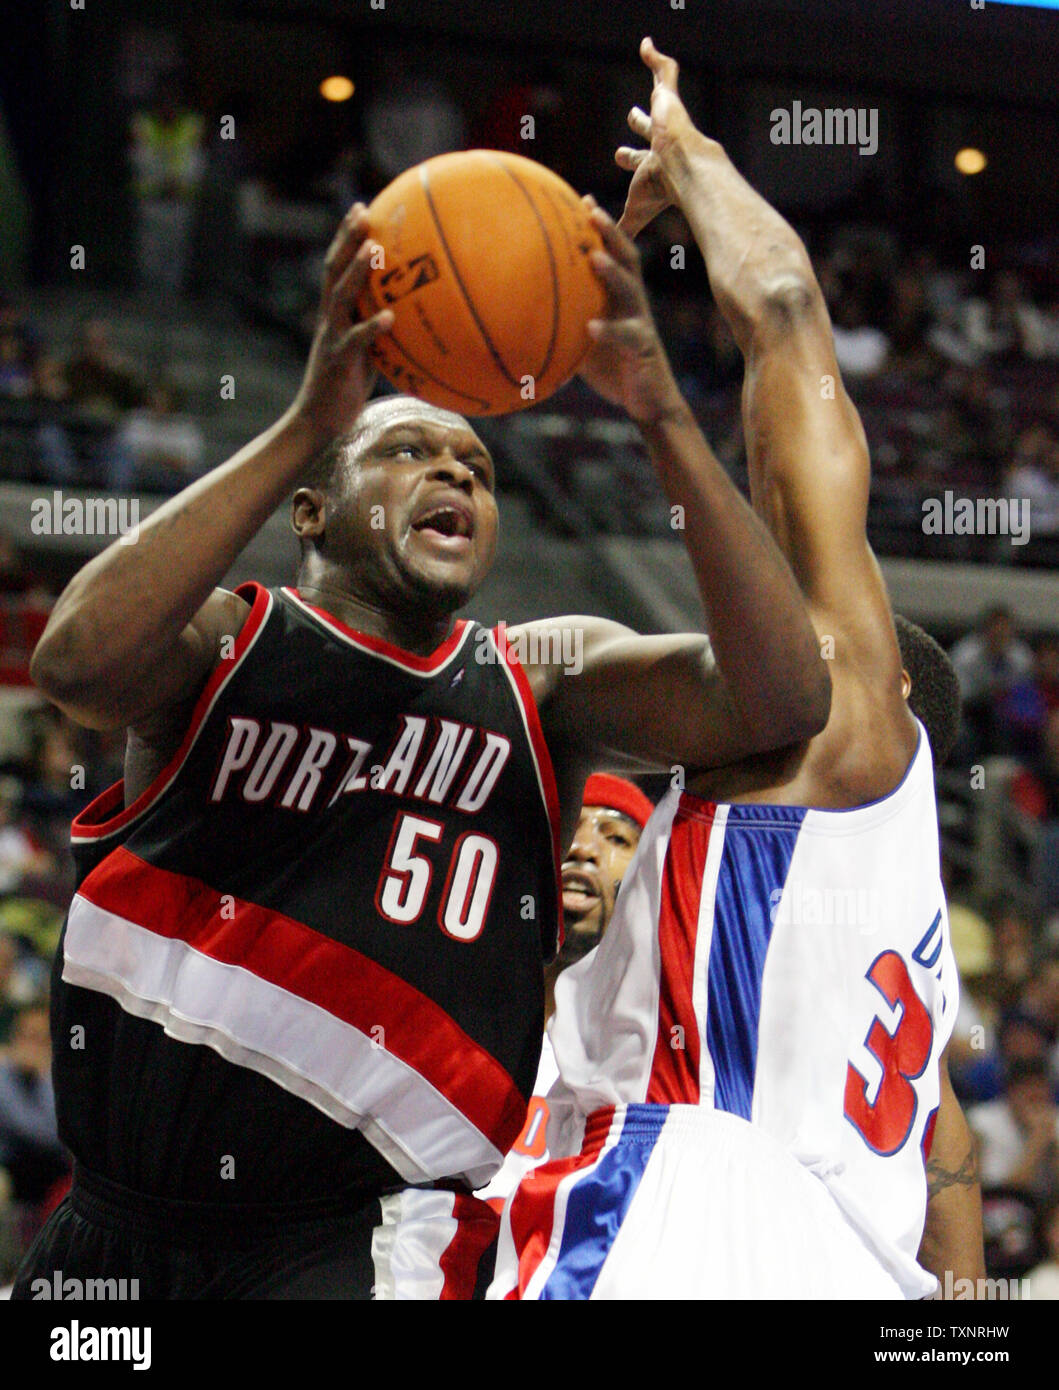 Portland Trail Blazers forward Zach Randolph (50) leaps past Detroit Pistons forward Dale Davis for a shot in the third quarter at The Palace of Auburn Hills in Auburn Hills, Michigan on December 5, 2006.  Randolph scored 31 points in the Trail Blazers' 88-85 victory over the Pistons.  (UPI Photo/Scott R. Galvin) Stock Photo